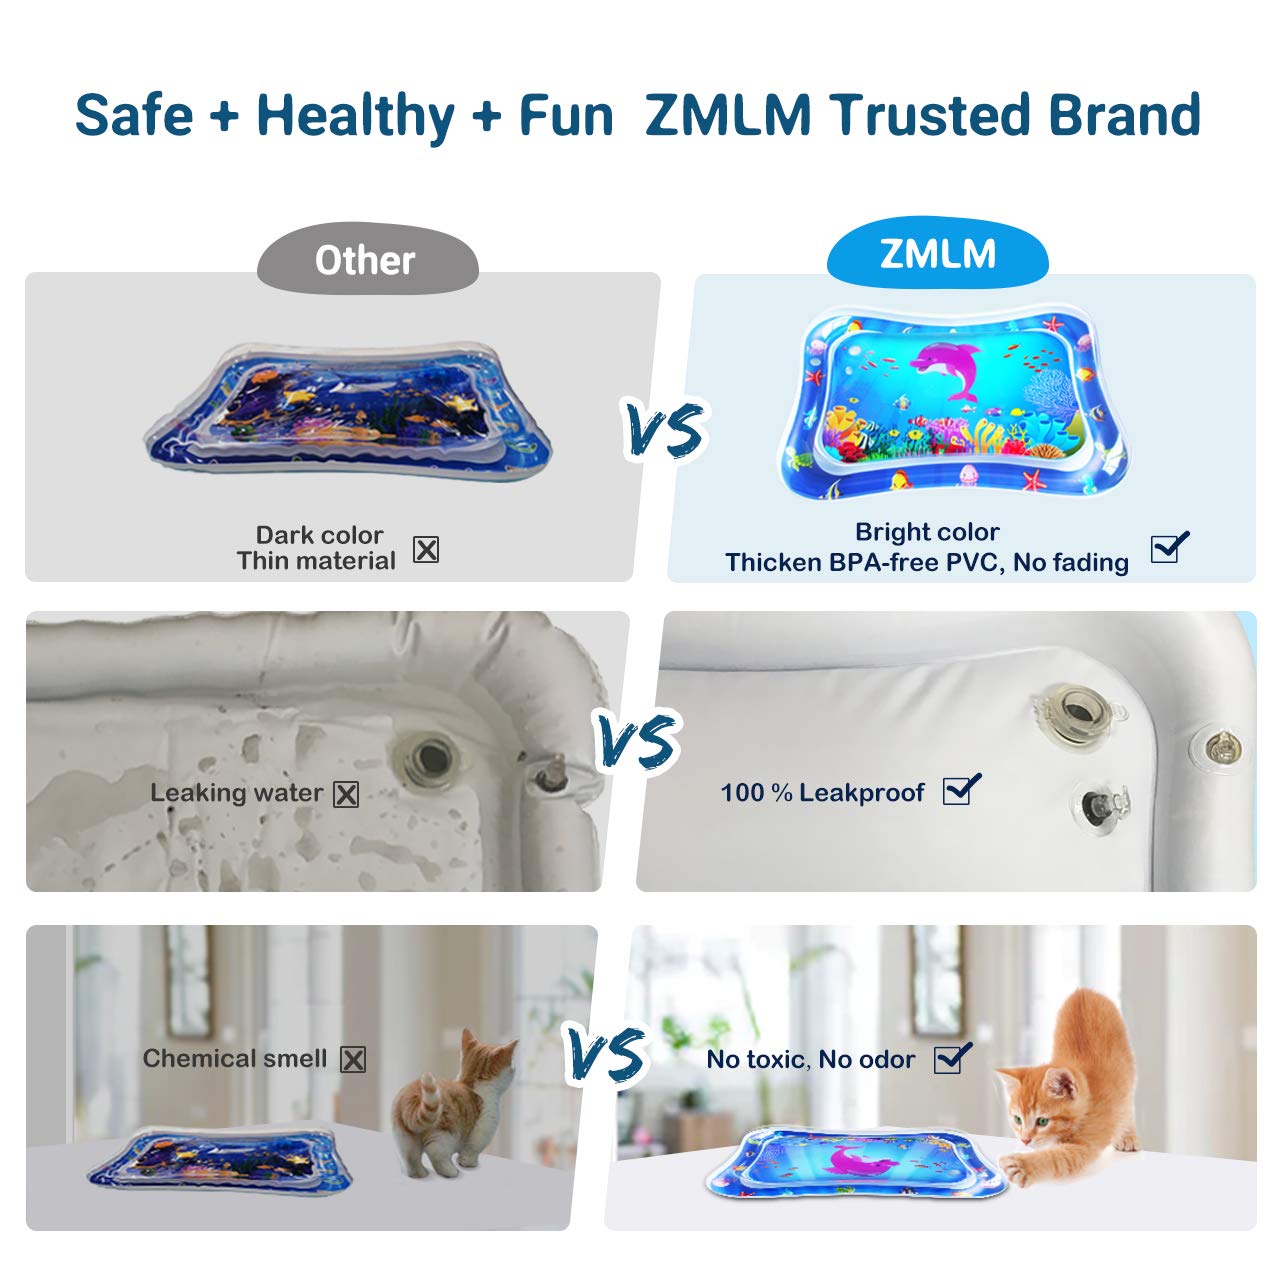 ZMLM Baby Tummy-Time Water Mat: Infant Toy Gift Activity Play Mat Inflatable Sensory Playmat Babies Belly Time Pat Indoor Small Pad for 3 6 9 Month Newborn Boy Girl Toddler Fun Game